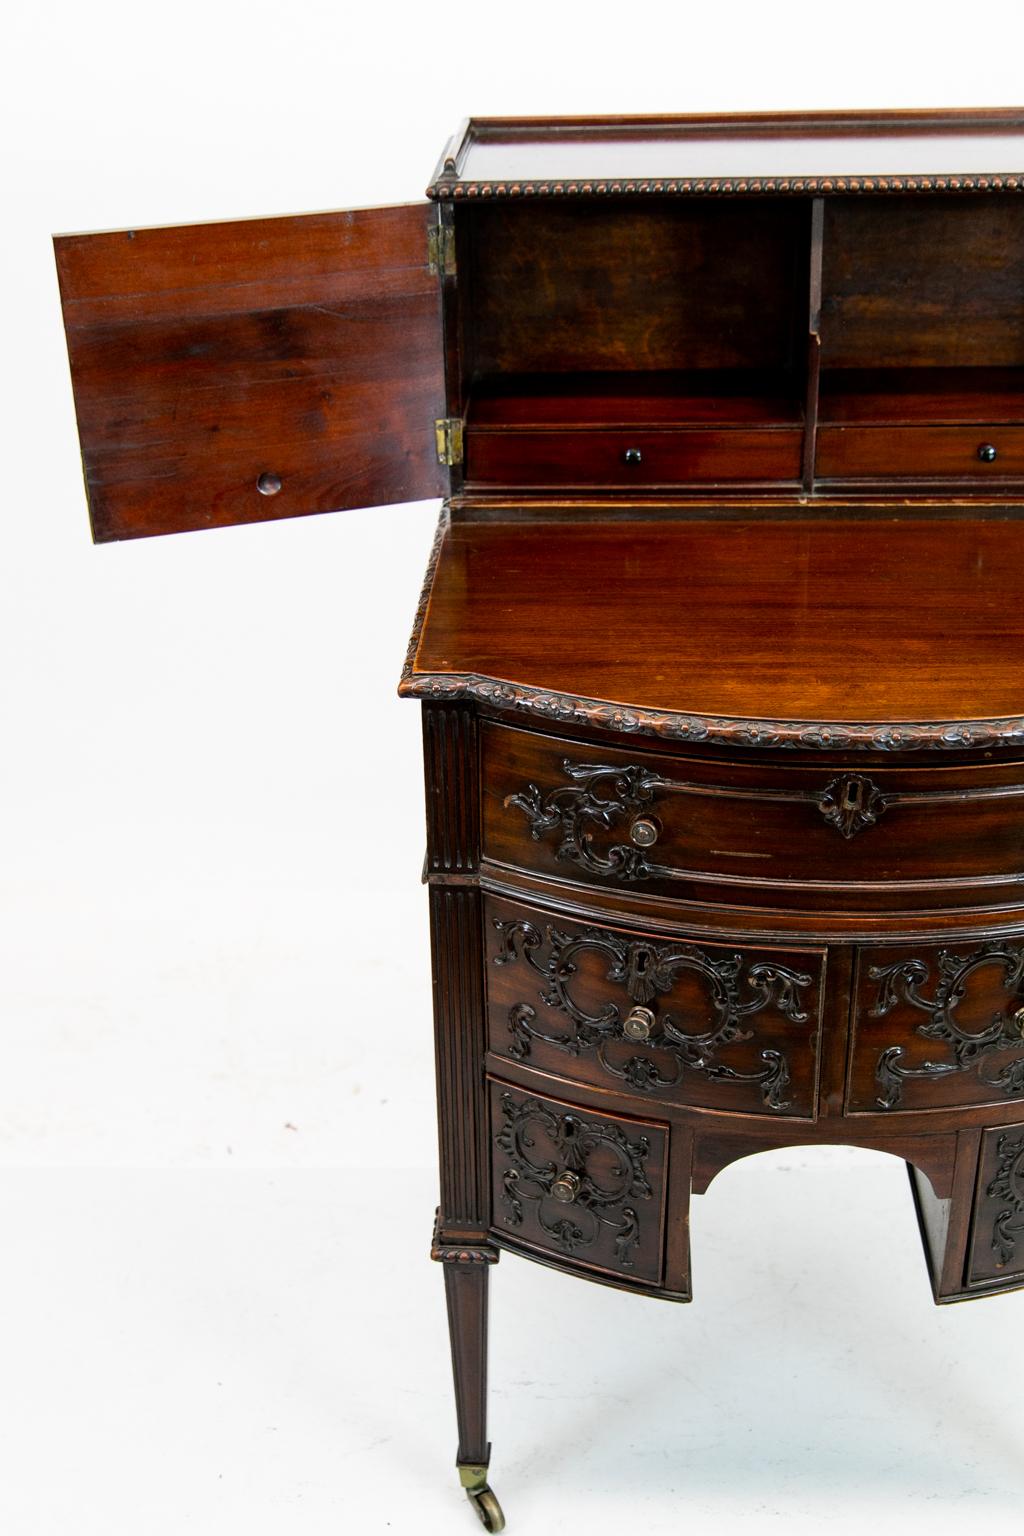 Hand-Carved Carved English Mahogany Hepplewhite Bow Front Desk On Legs